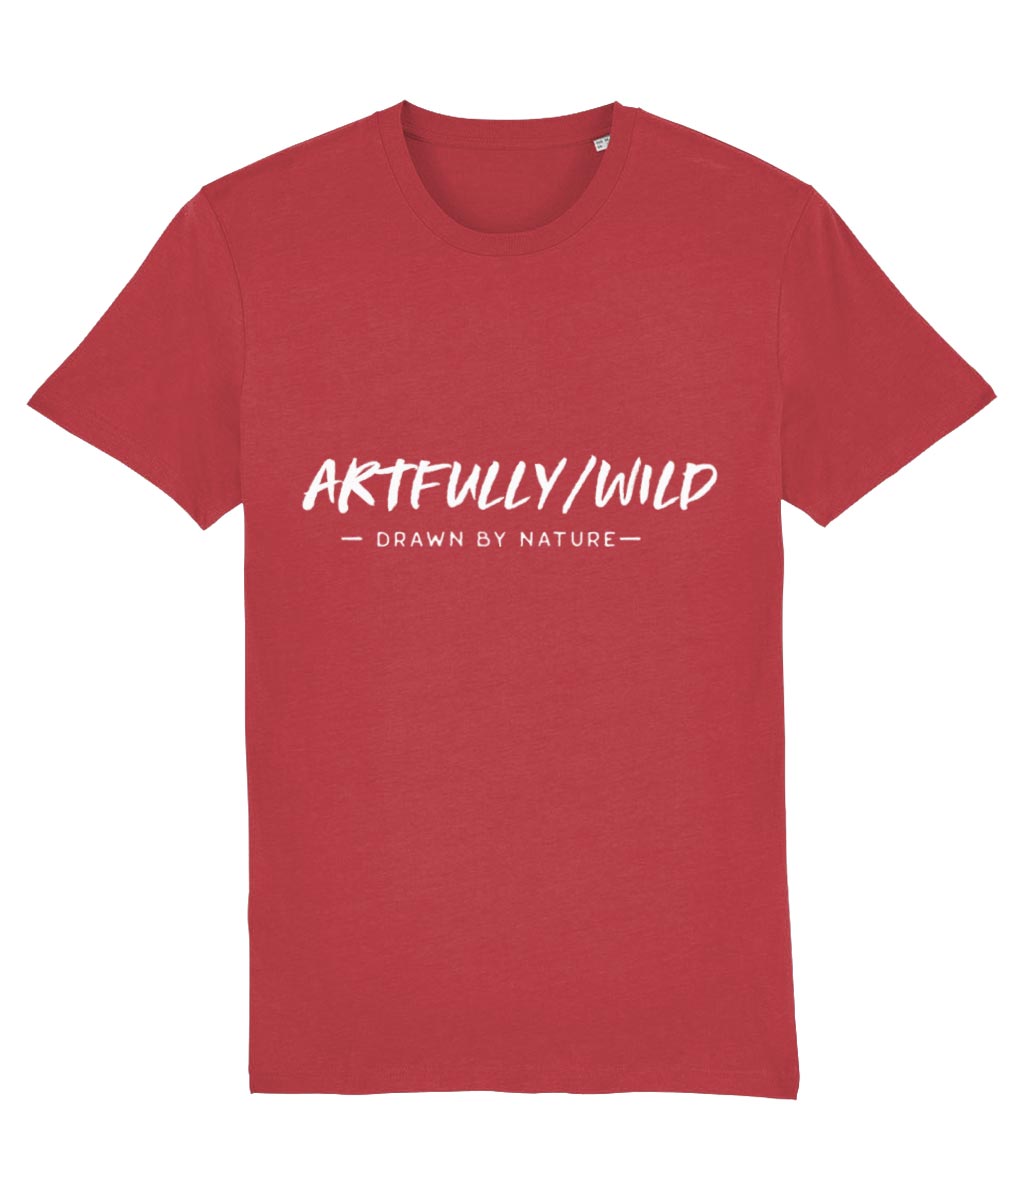 'ARTFULLY WILD. DRAWN BY NATURE' Organic Cotton Red T-Shirt. Unisex/Men/Women. Printed with eco-friendly water-based Inks. Sustainable Ethical Clothing by Artfully/Wild.